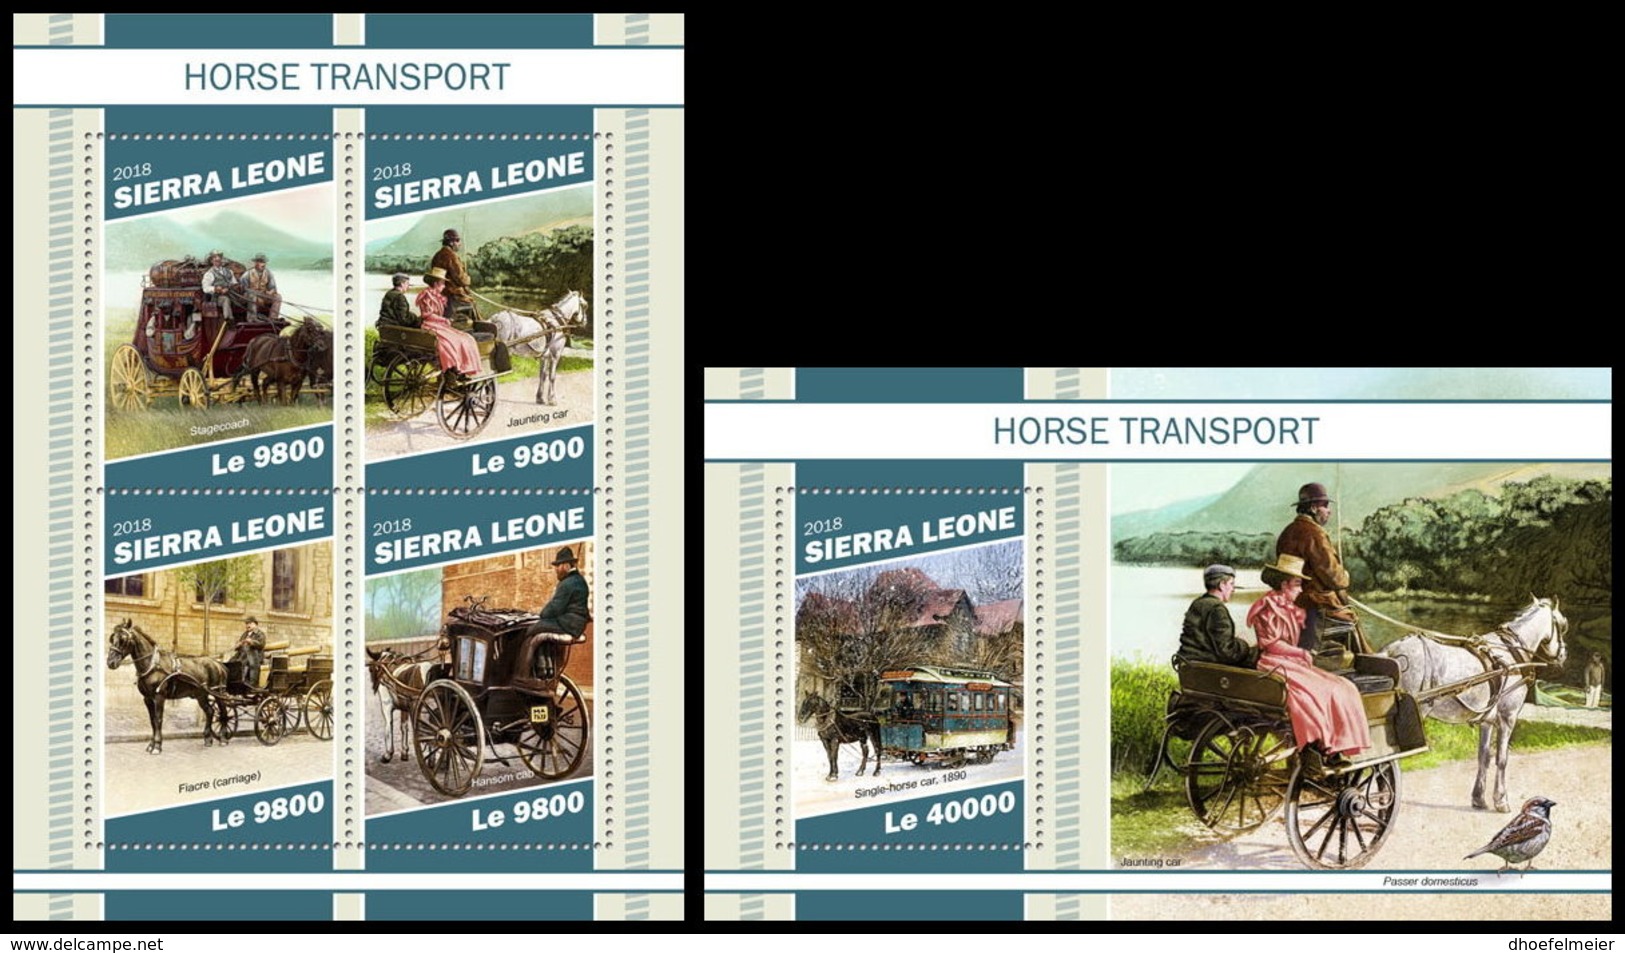 SIERRA LEONE 2018 MNH Horse Transports Pferdekutschen Chevaux Caleches M/S+S/S - IMPERFORATED - DH1905 - Diligences